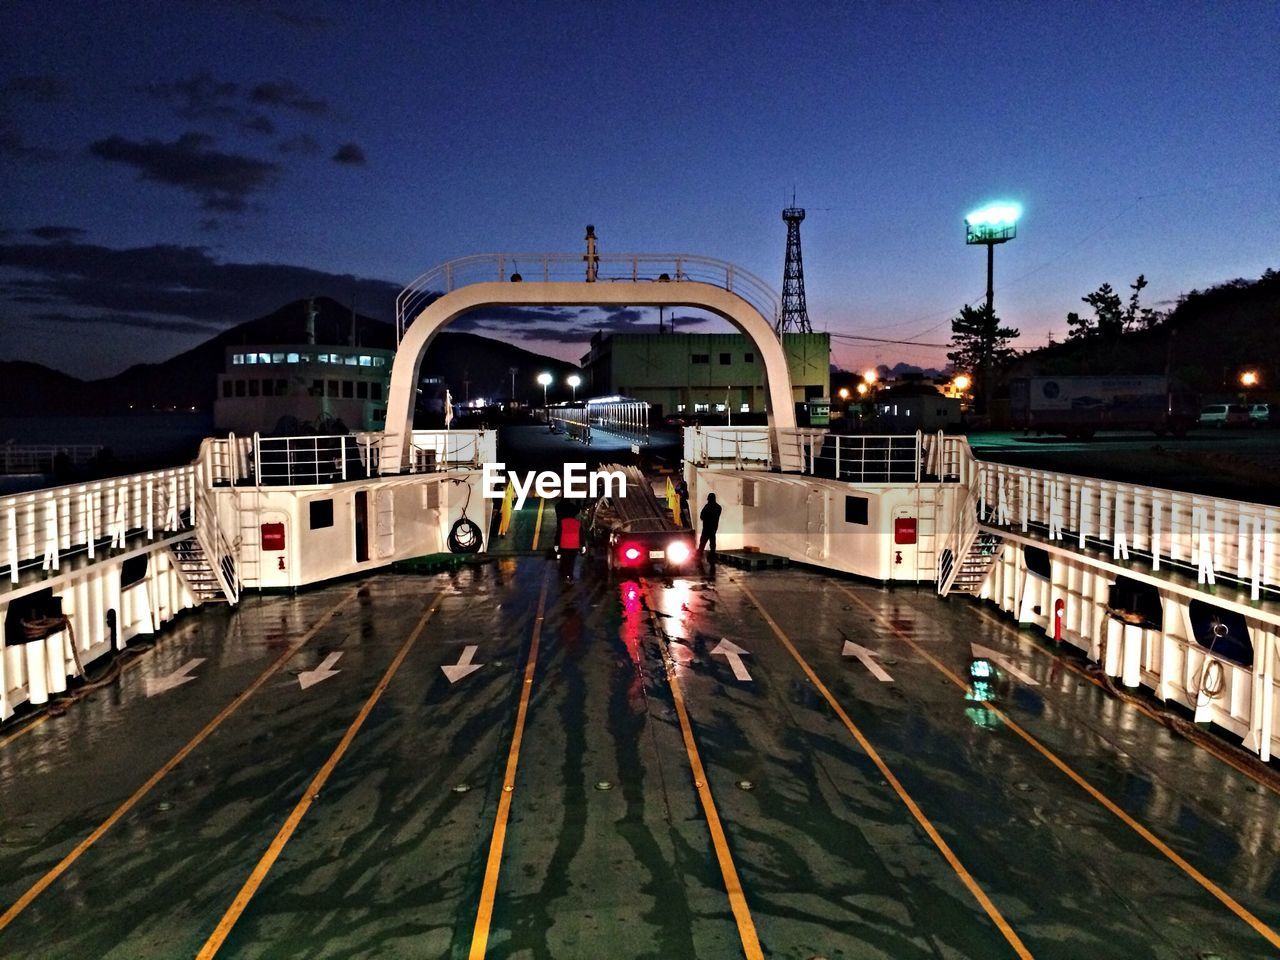 View of ferry deck